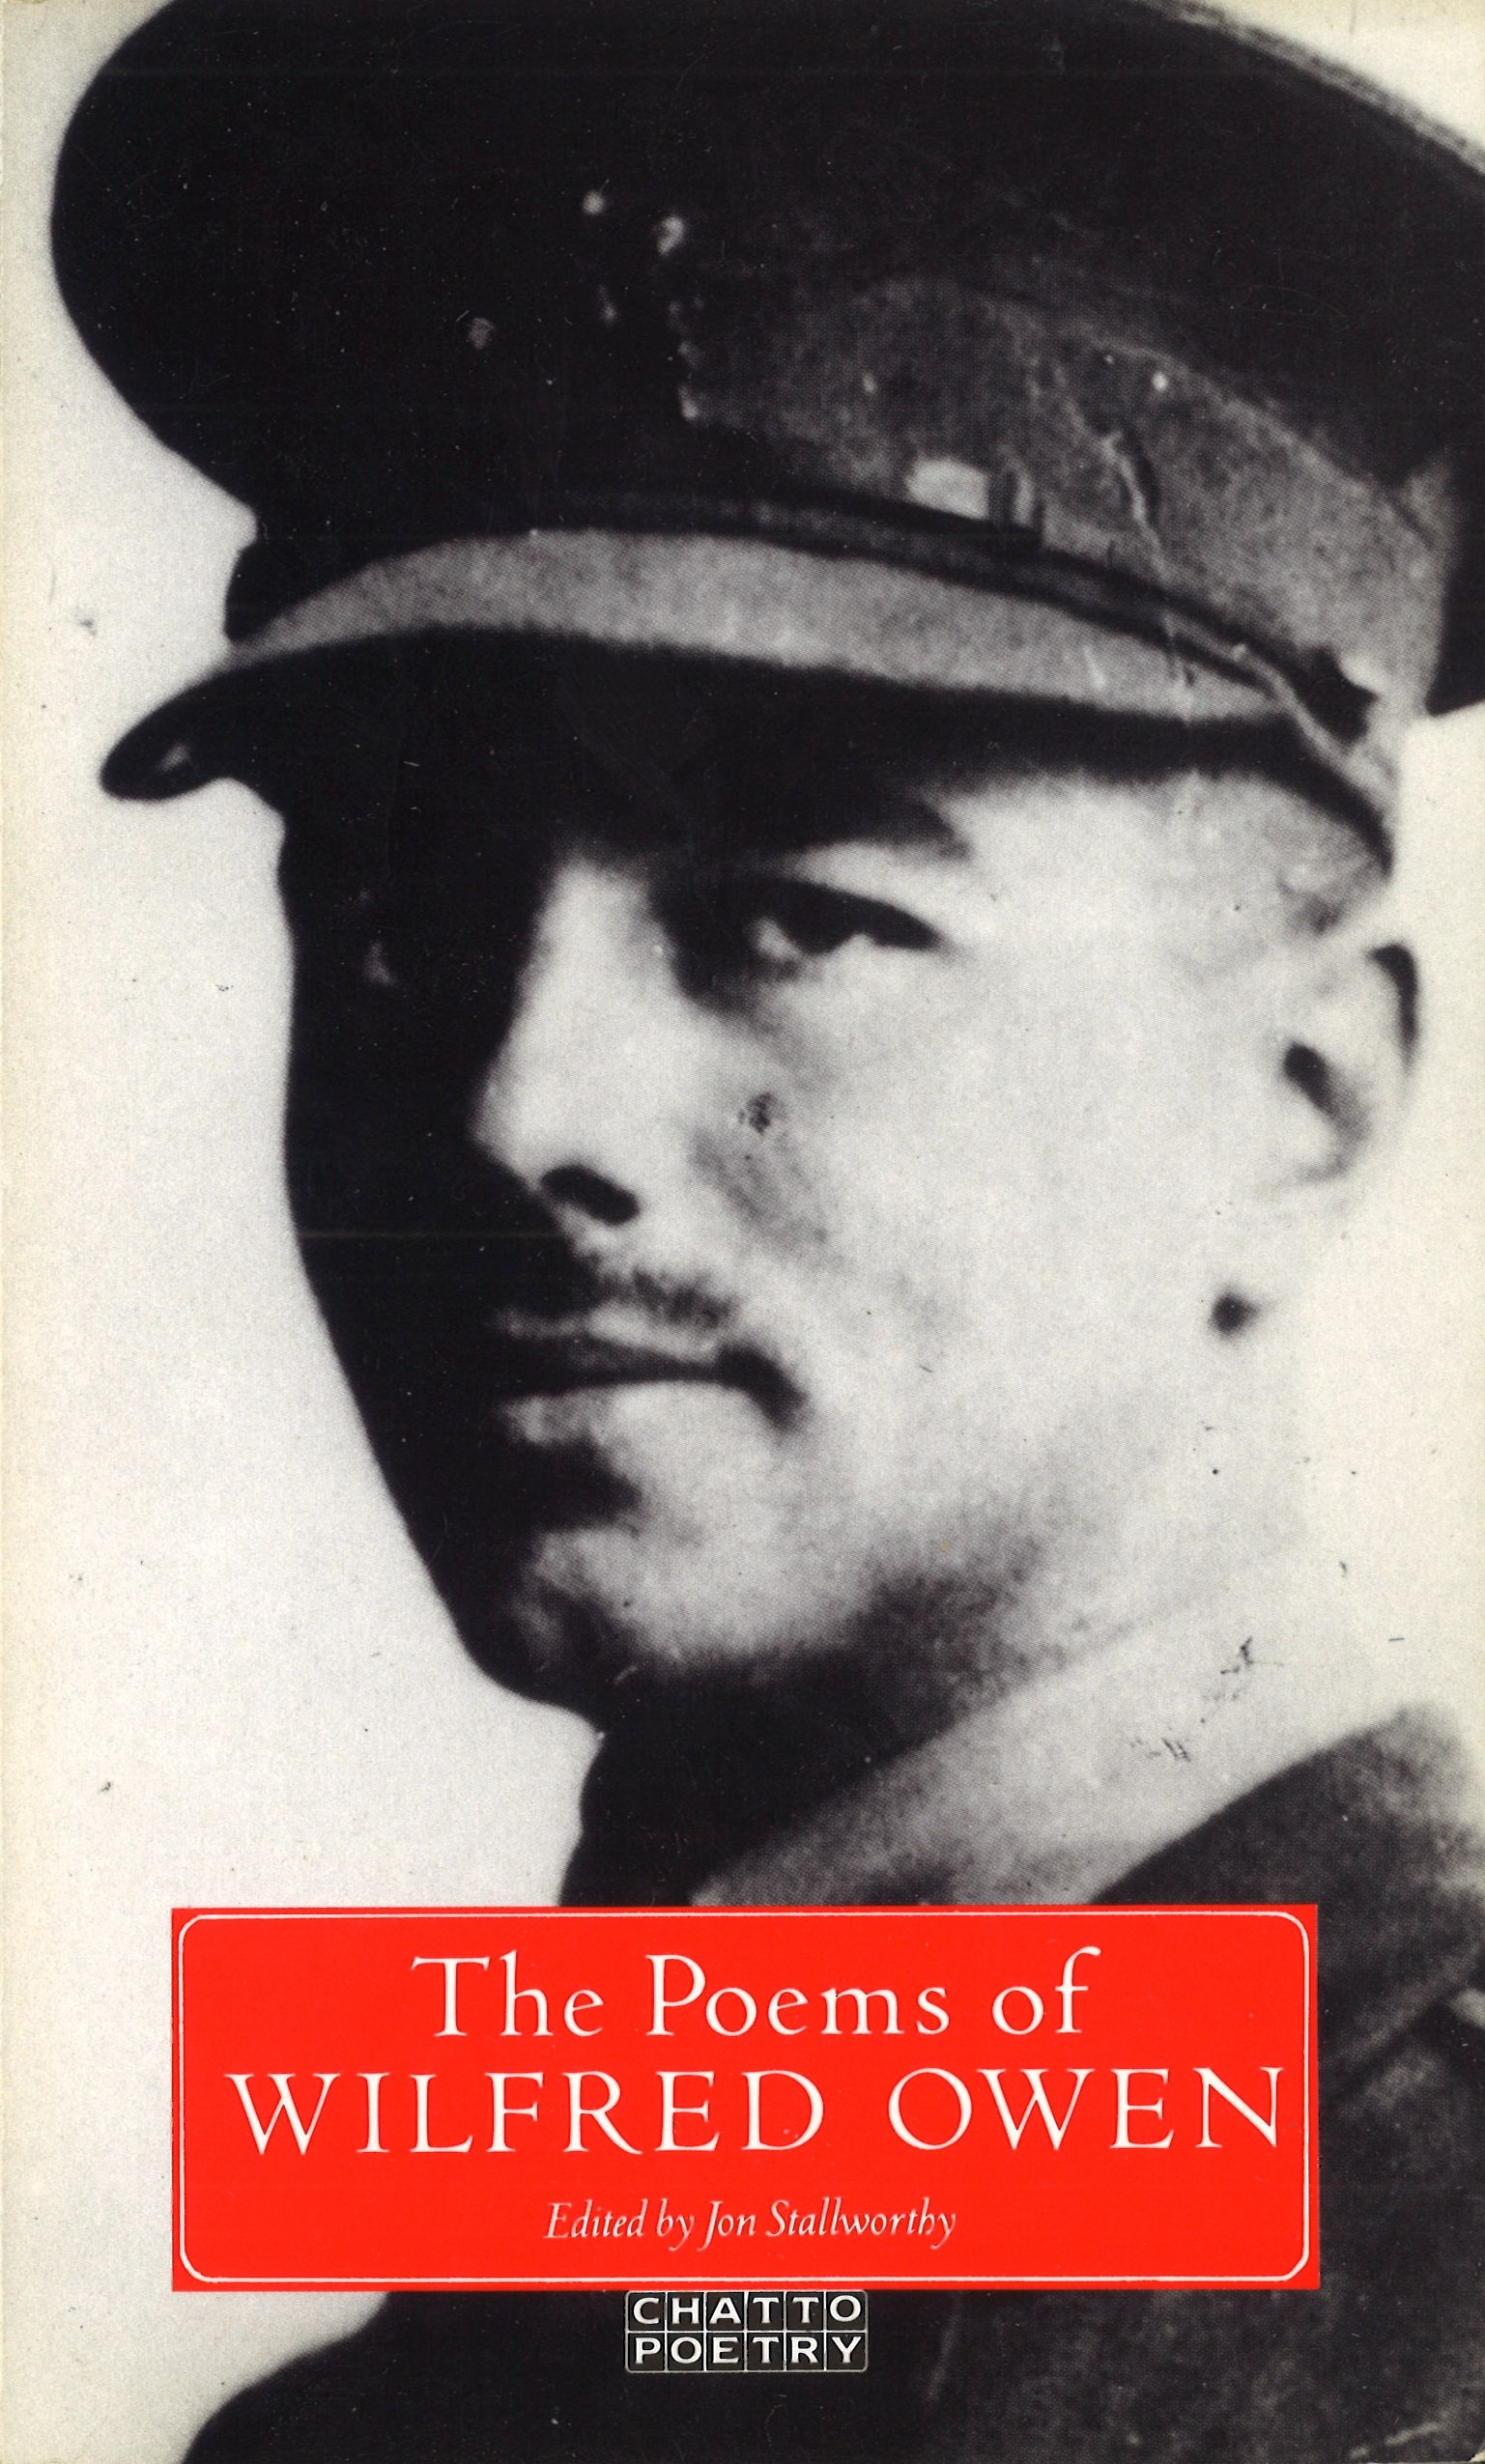 The Poems Of Wilfred Owen By Wilfred Owen Penguin Books New Zealand